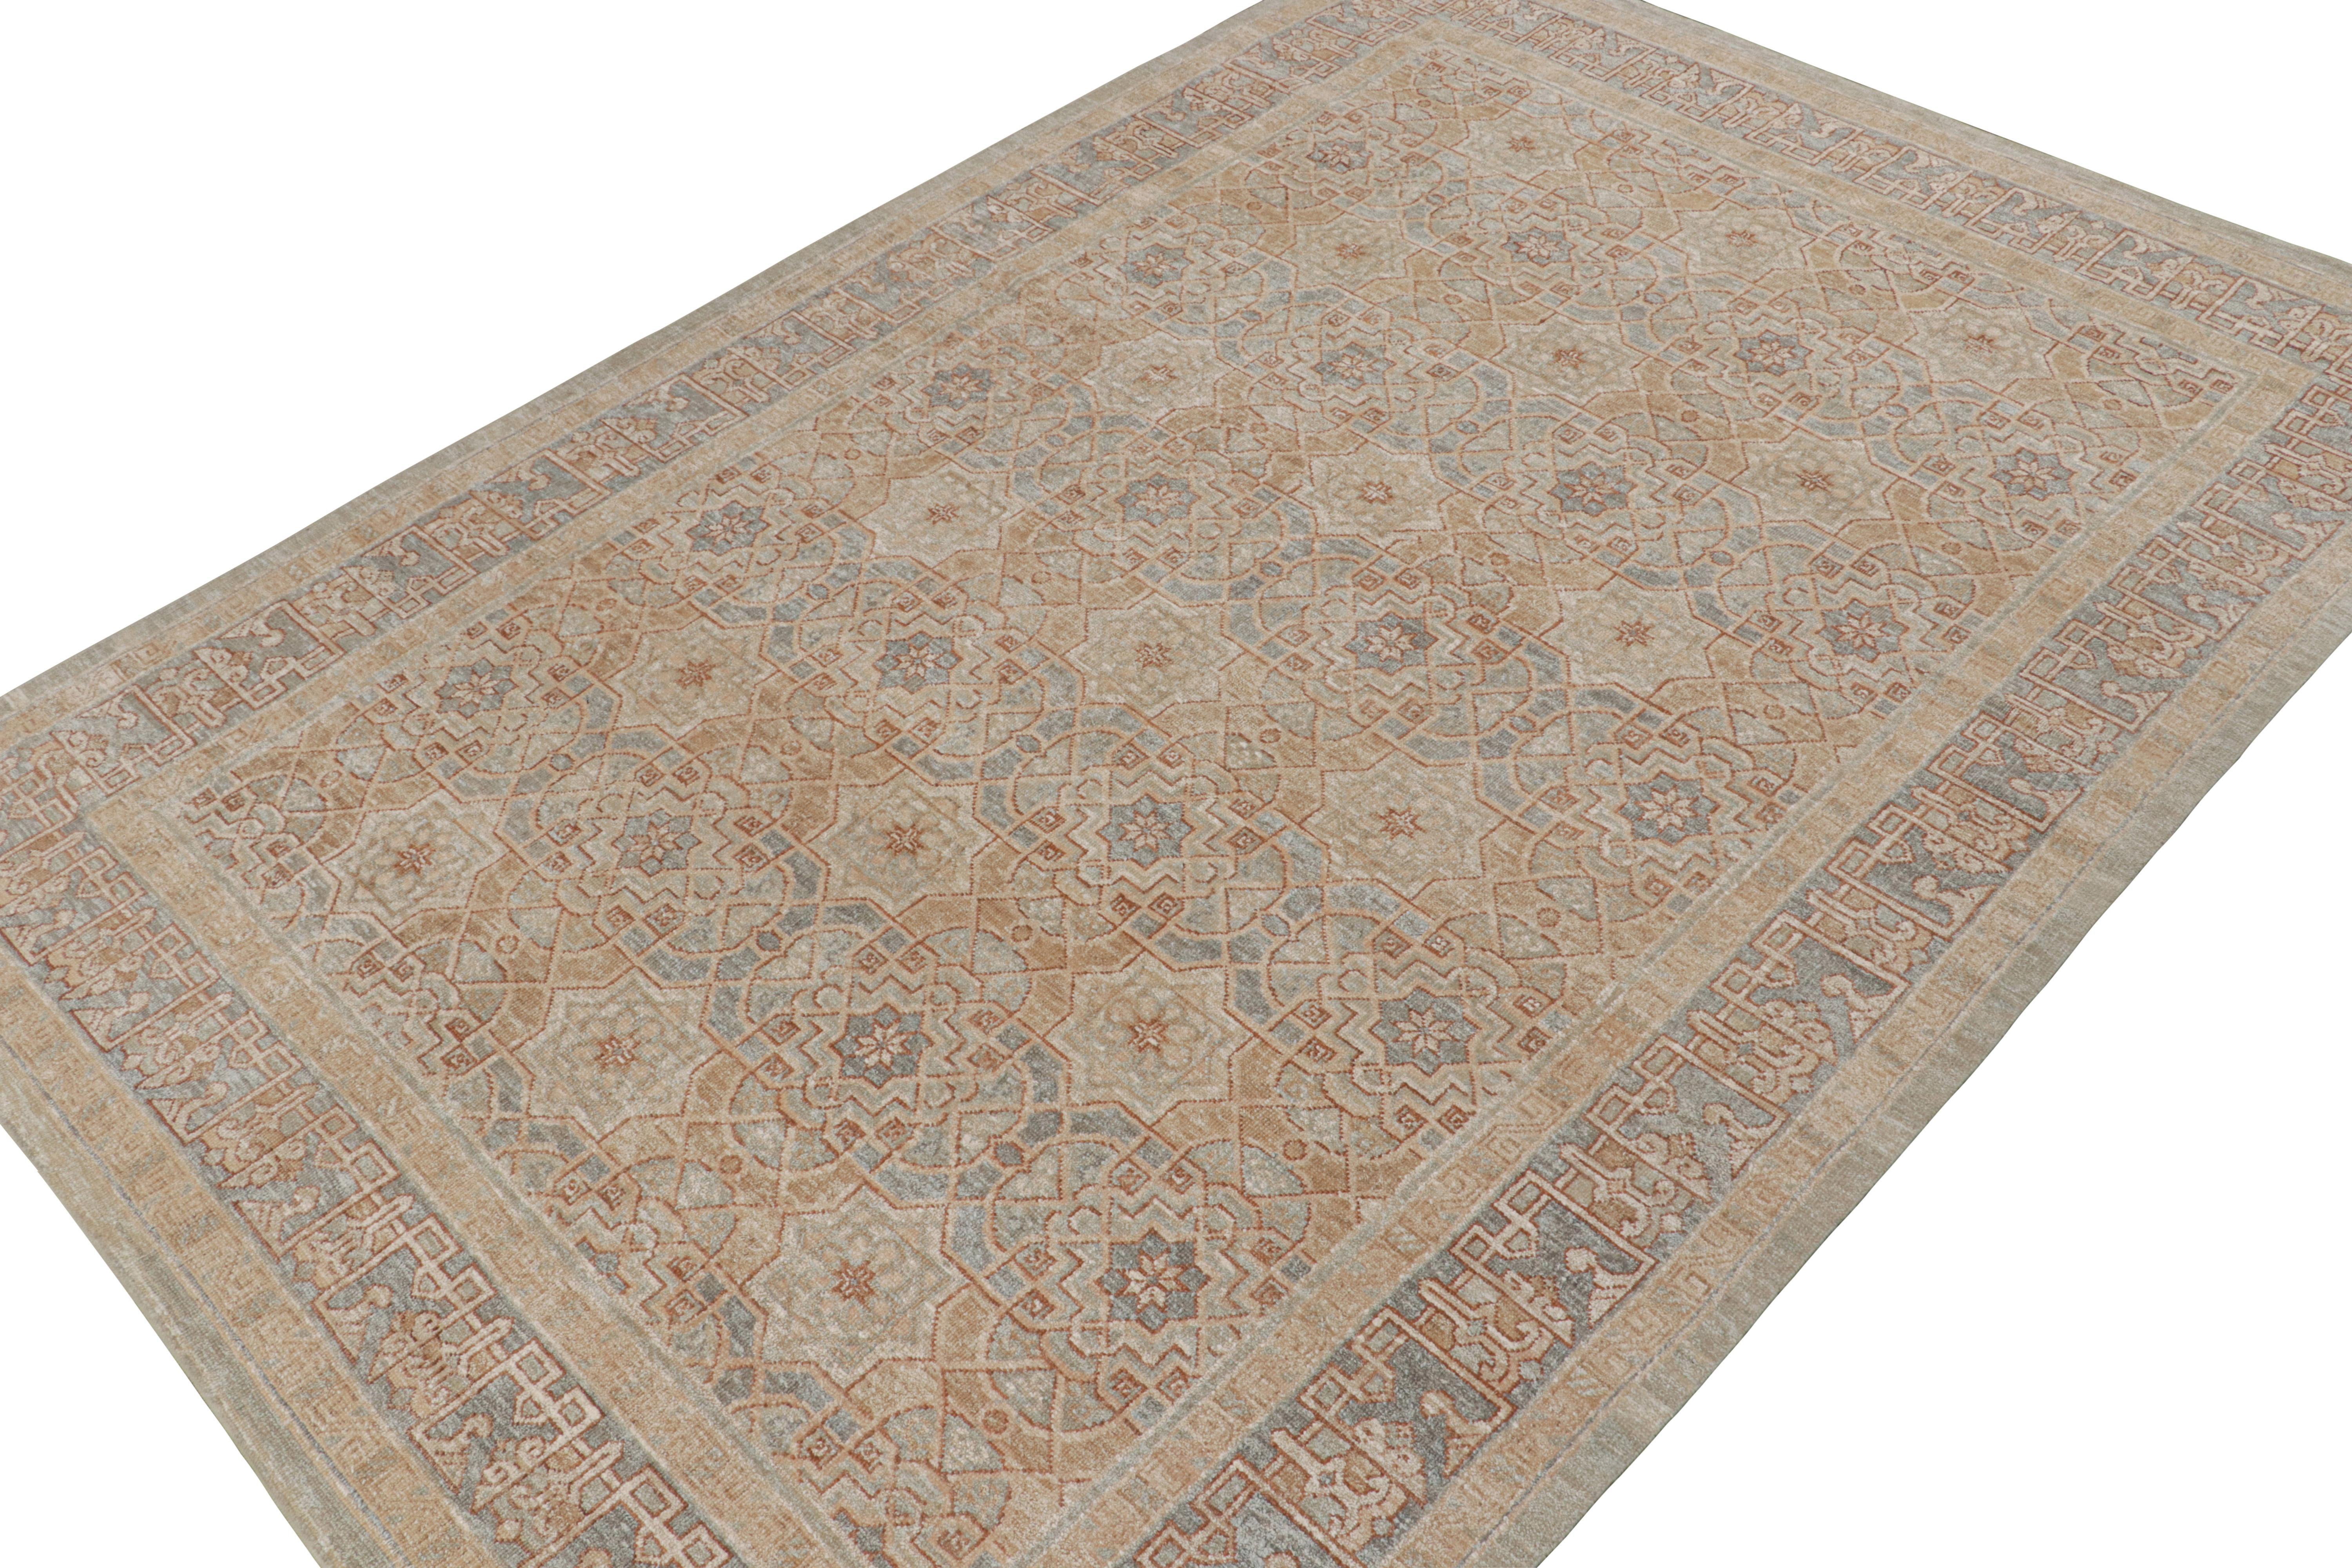 Hand-Knotted Rug & Kilim’s Oushak Style Rug in Beige-Brown & Blue Geometric Patterns For Sale